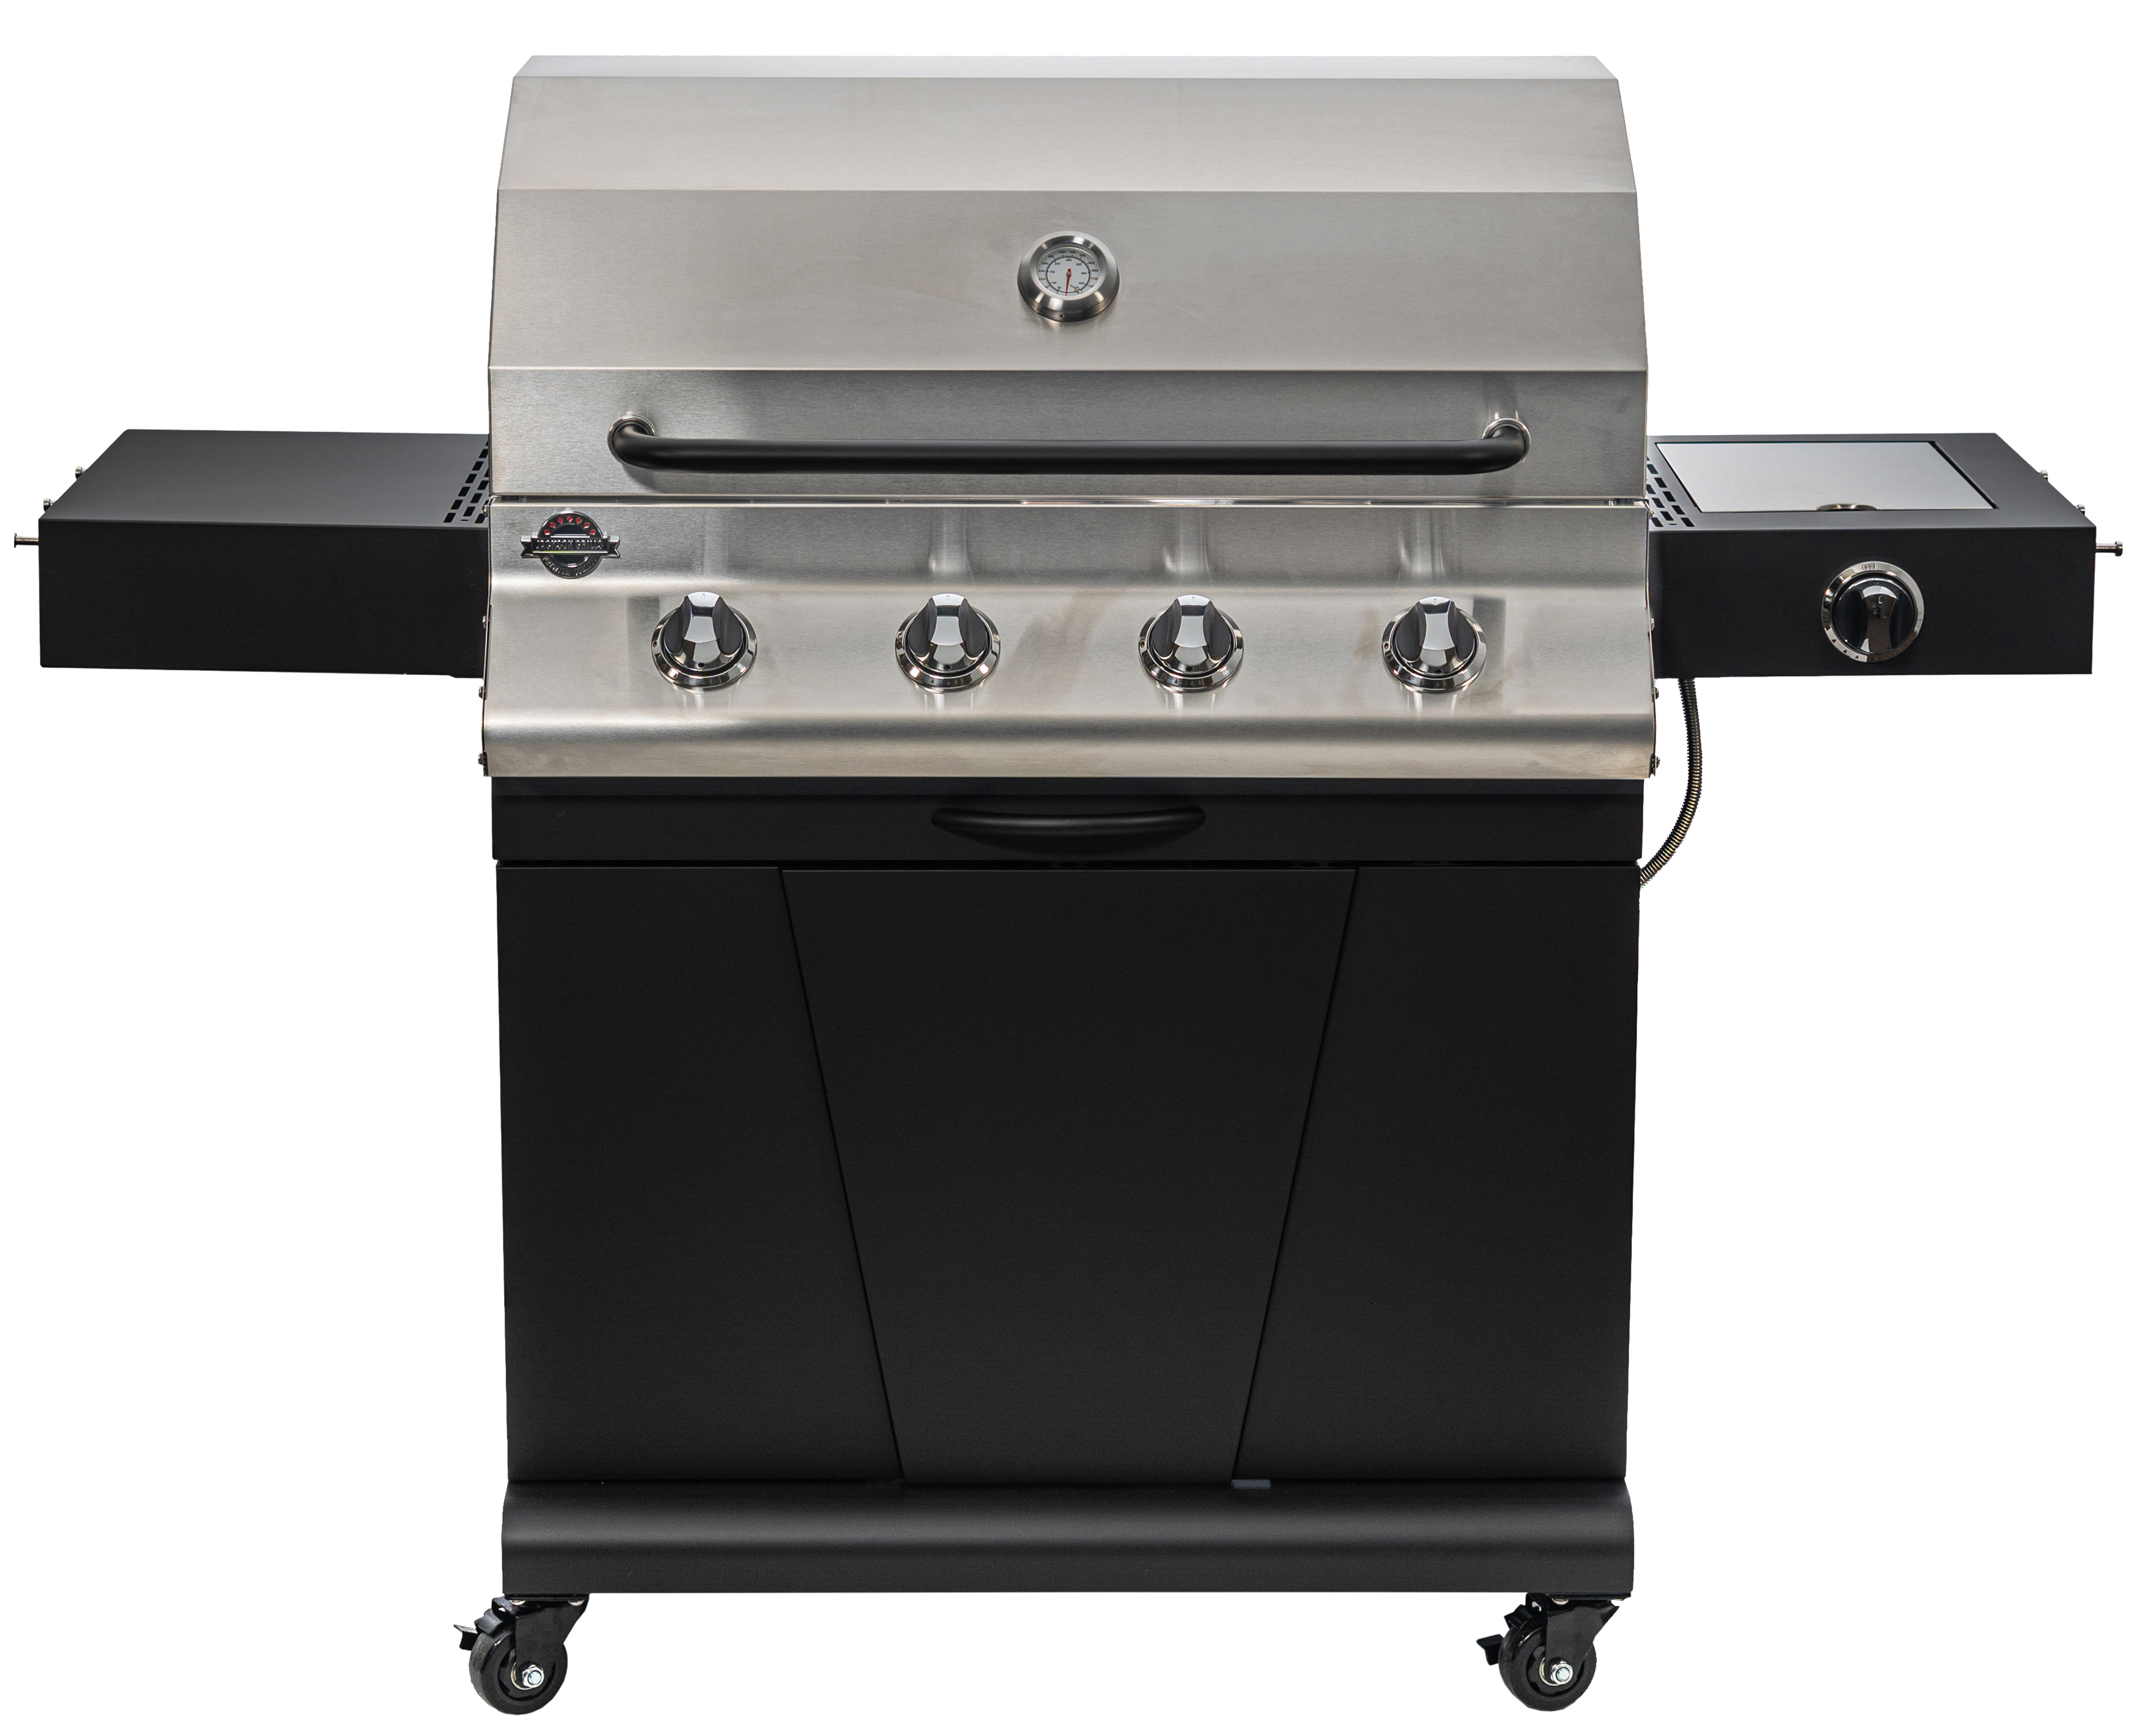 stainless steel grill